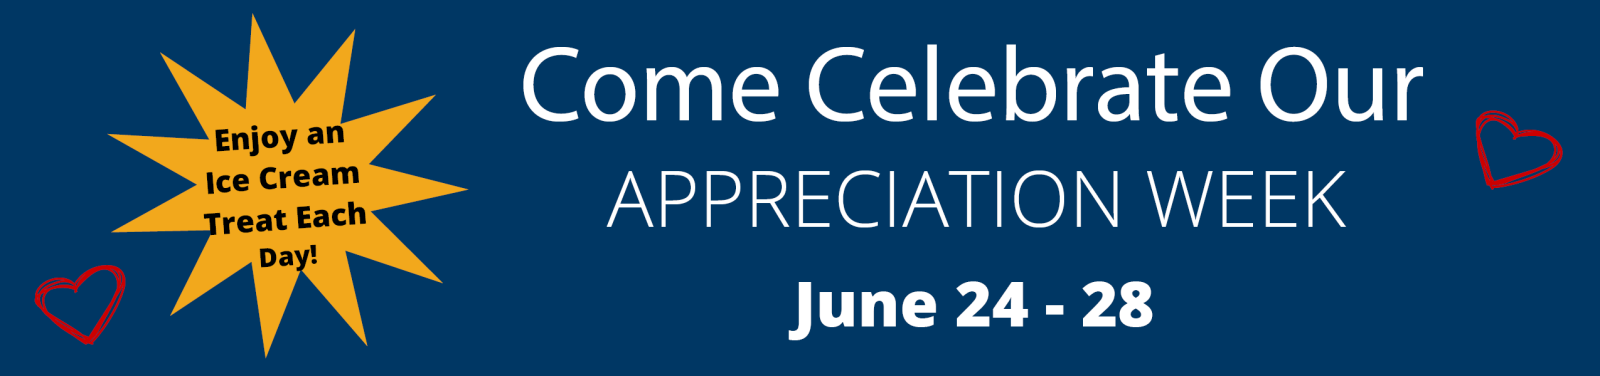 Come Celebrate our Appreciation week June 24th - 28th with ice cream treat each day 